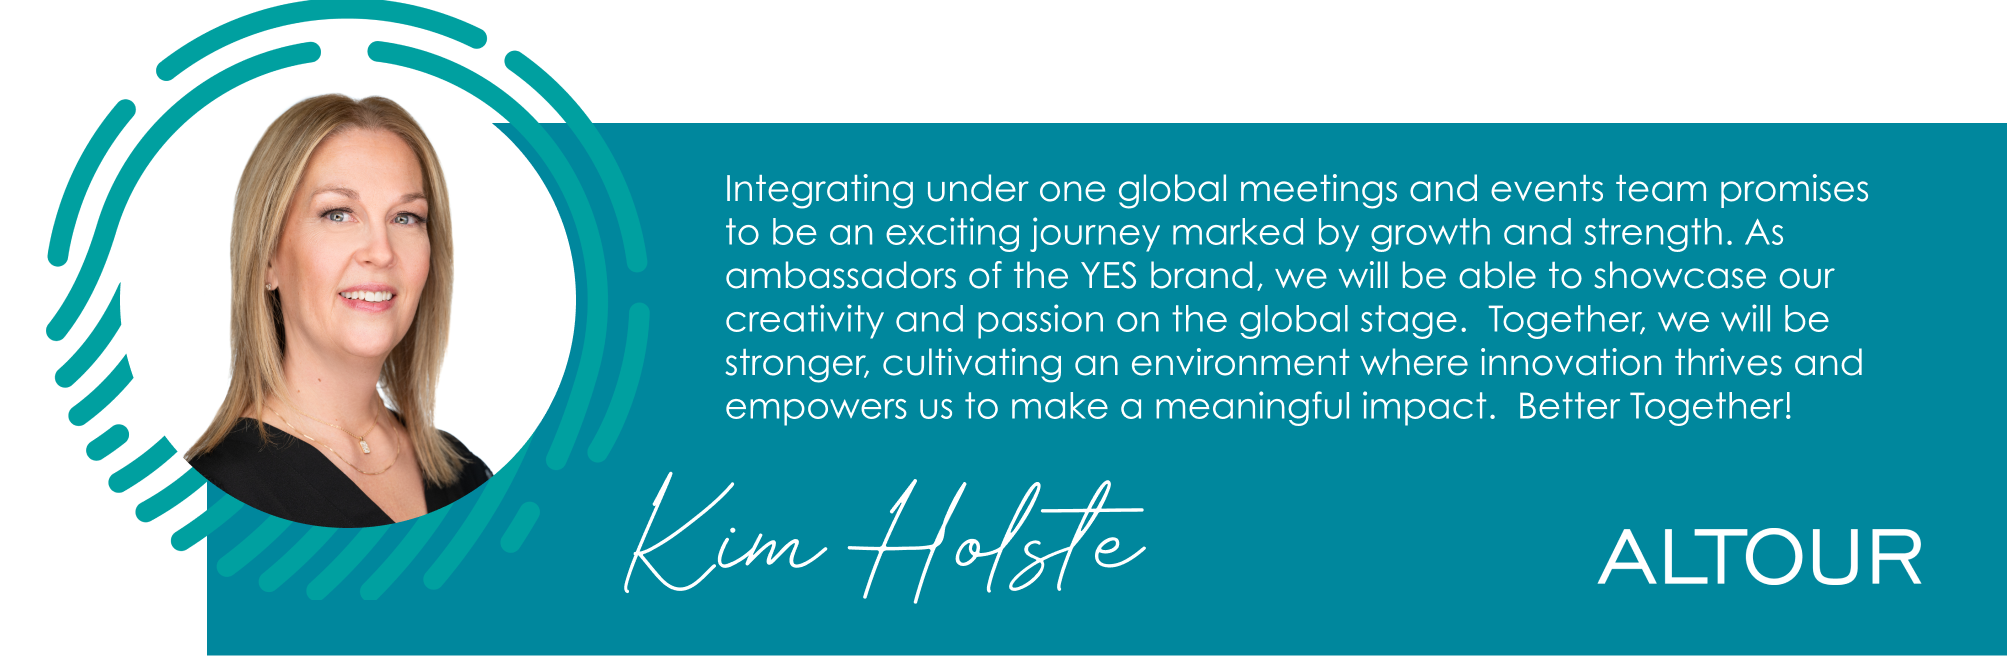 Integrating under one global meetings and events team promises  to be an exciting journey marked by growth and strength. As ambassadors of the YES brand, we will be able to showcase our creativity and passion on the global stage.  Together, we will be stronger, cultivating an environment where innovation thrives and empowers us to make a meaningful impact.  Better Together!  